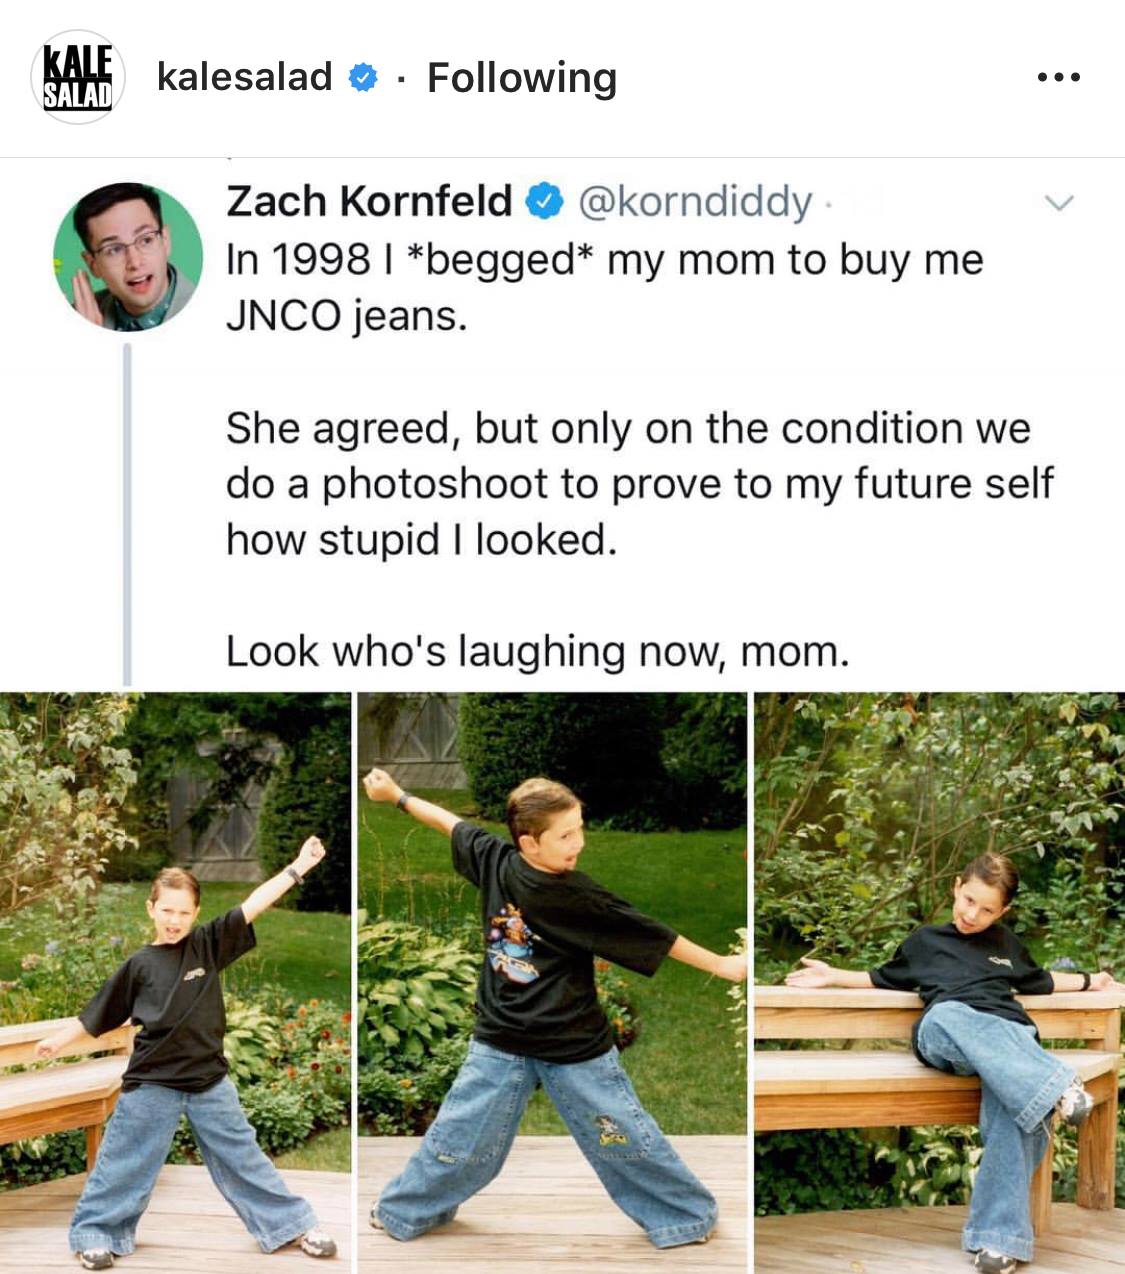 jnco jeans meme - Kale kalesalad . ing Zach Kornfeld . In 1998 | begged my mom to buy me Jnco jeans. She agreed, but only on the condition we do a photoshoot to prove to my future self how stupid I looked. Look who's laughing now, mom.